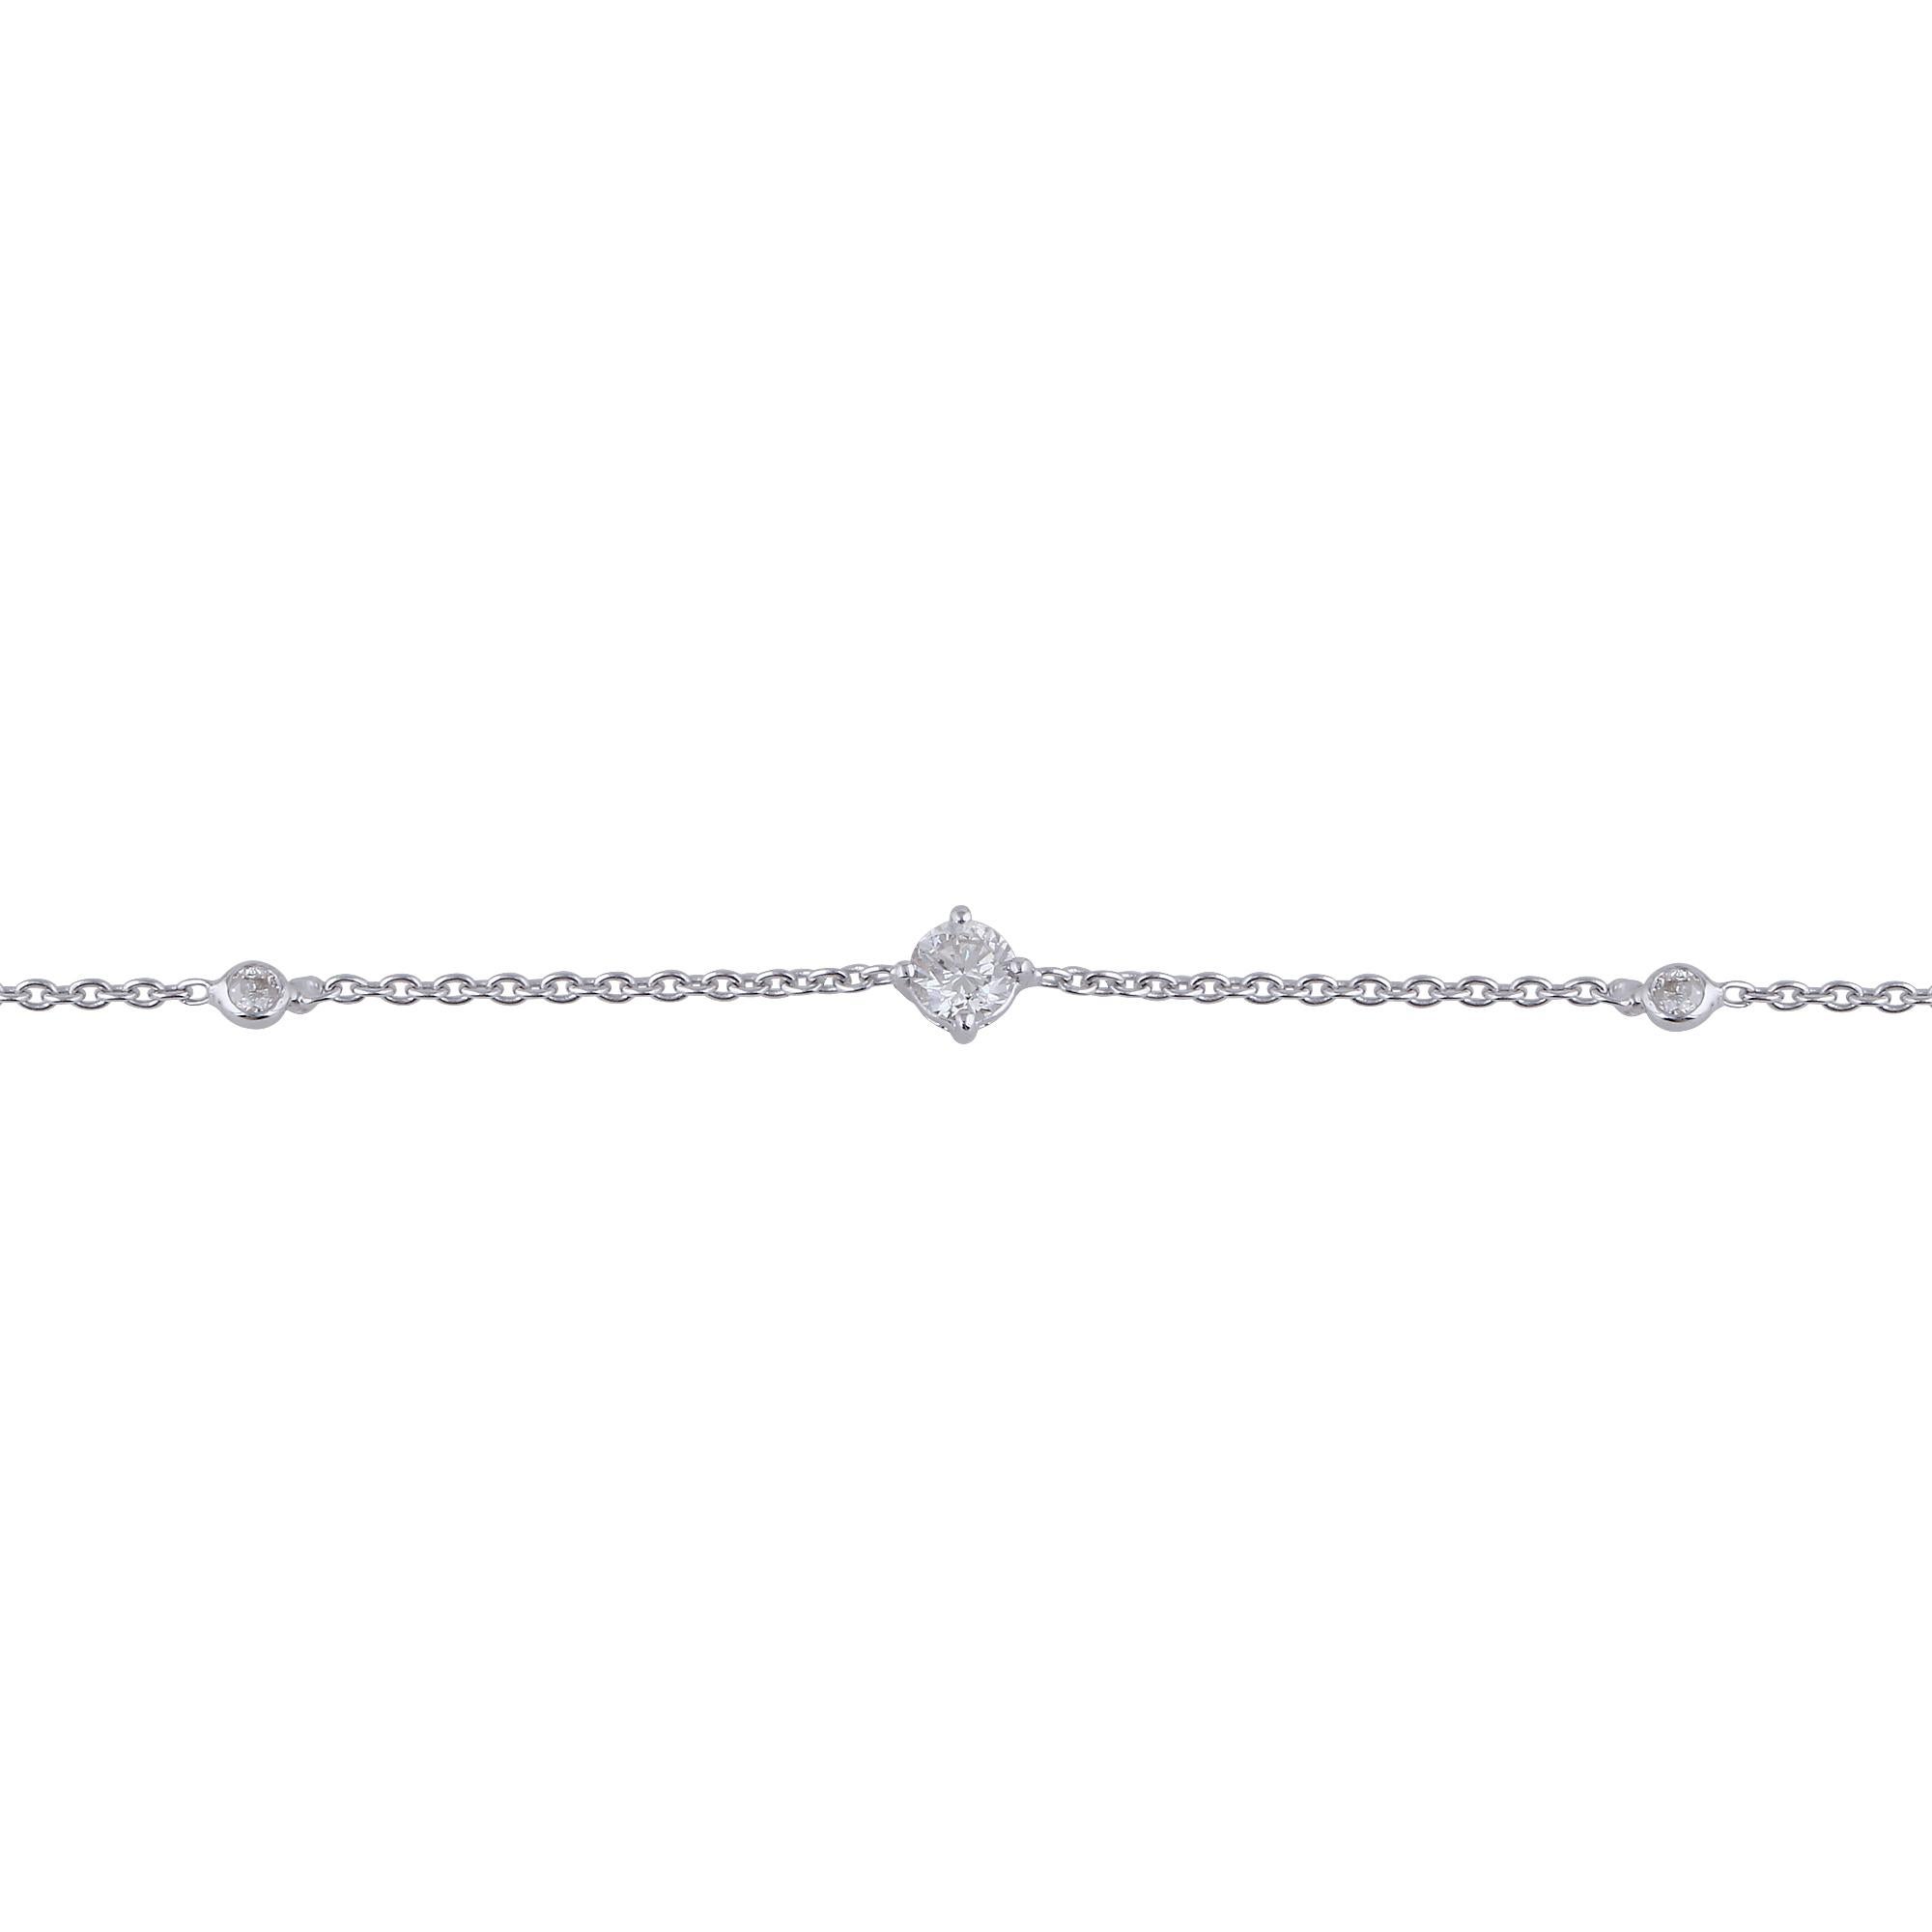 Item Code :- SEBR-4038
Gross Wt. :- 1.78 gm
18k Solid White Gold Wt. :- 1.72 gm
Natural Diamond Wt. :- 0.28 Ct. ( AVERAGE DIAMOND CLARITY SI1-SI2 & COLOR H-I )
Bracelet Size :- 7 Inches Long

✦ Sizing
.....................
We can adjust most items